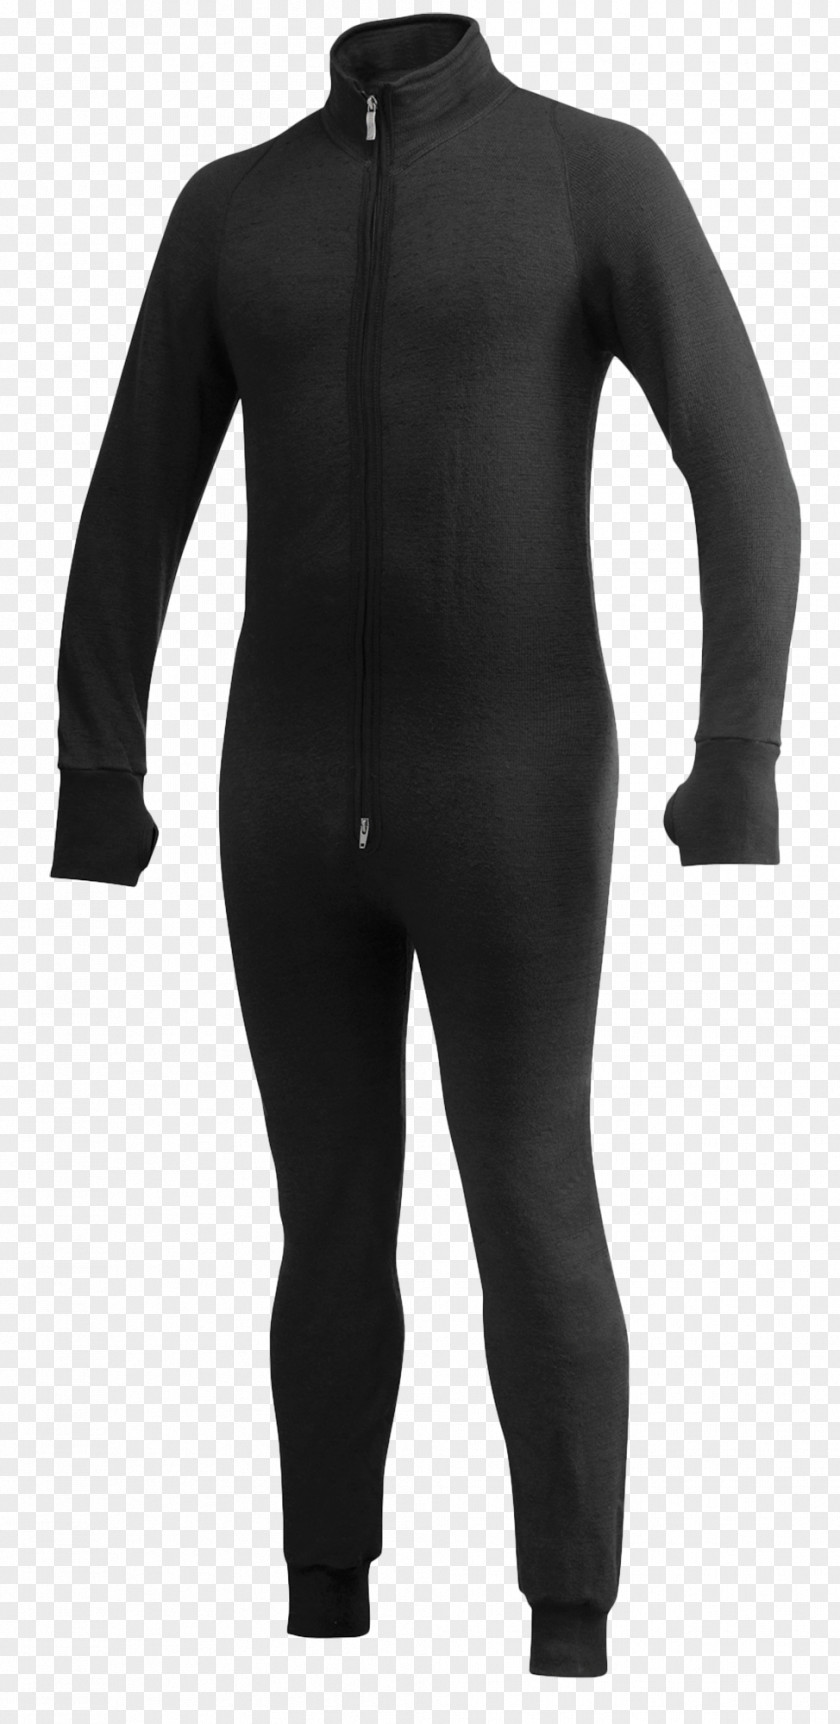 Suit Wetsuit Surfing Clothing Free-diving Standup Paddleboarding PNG